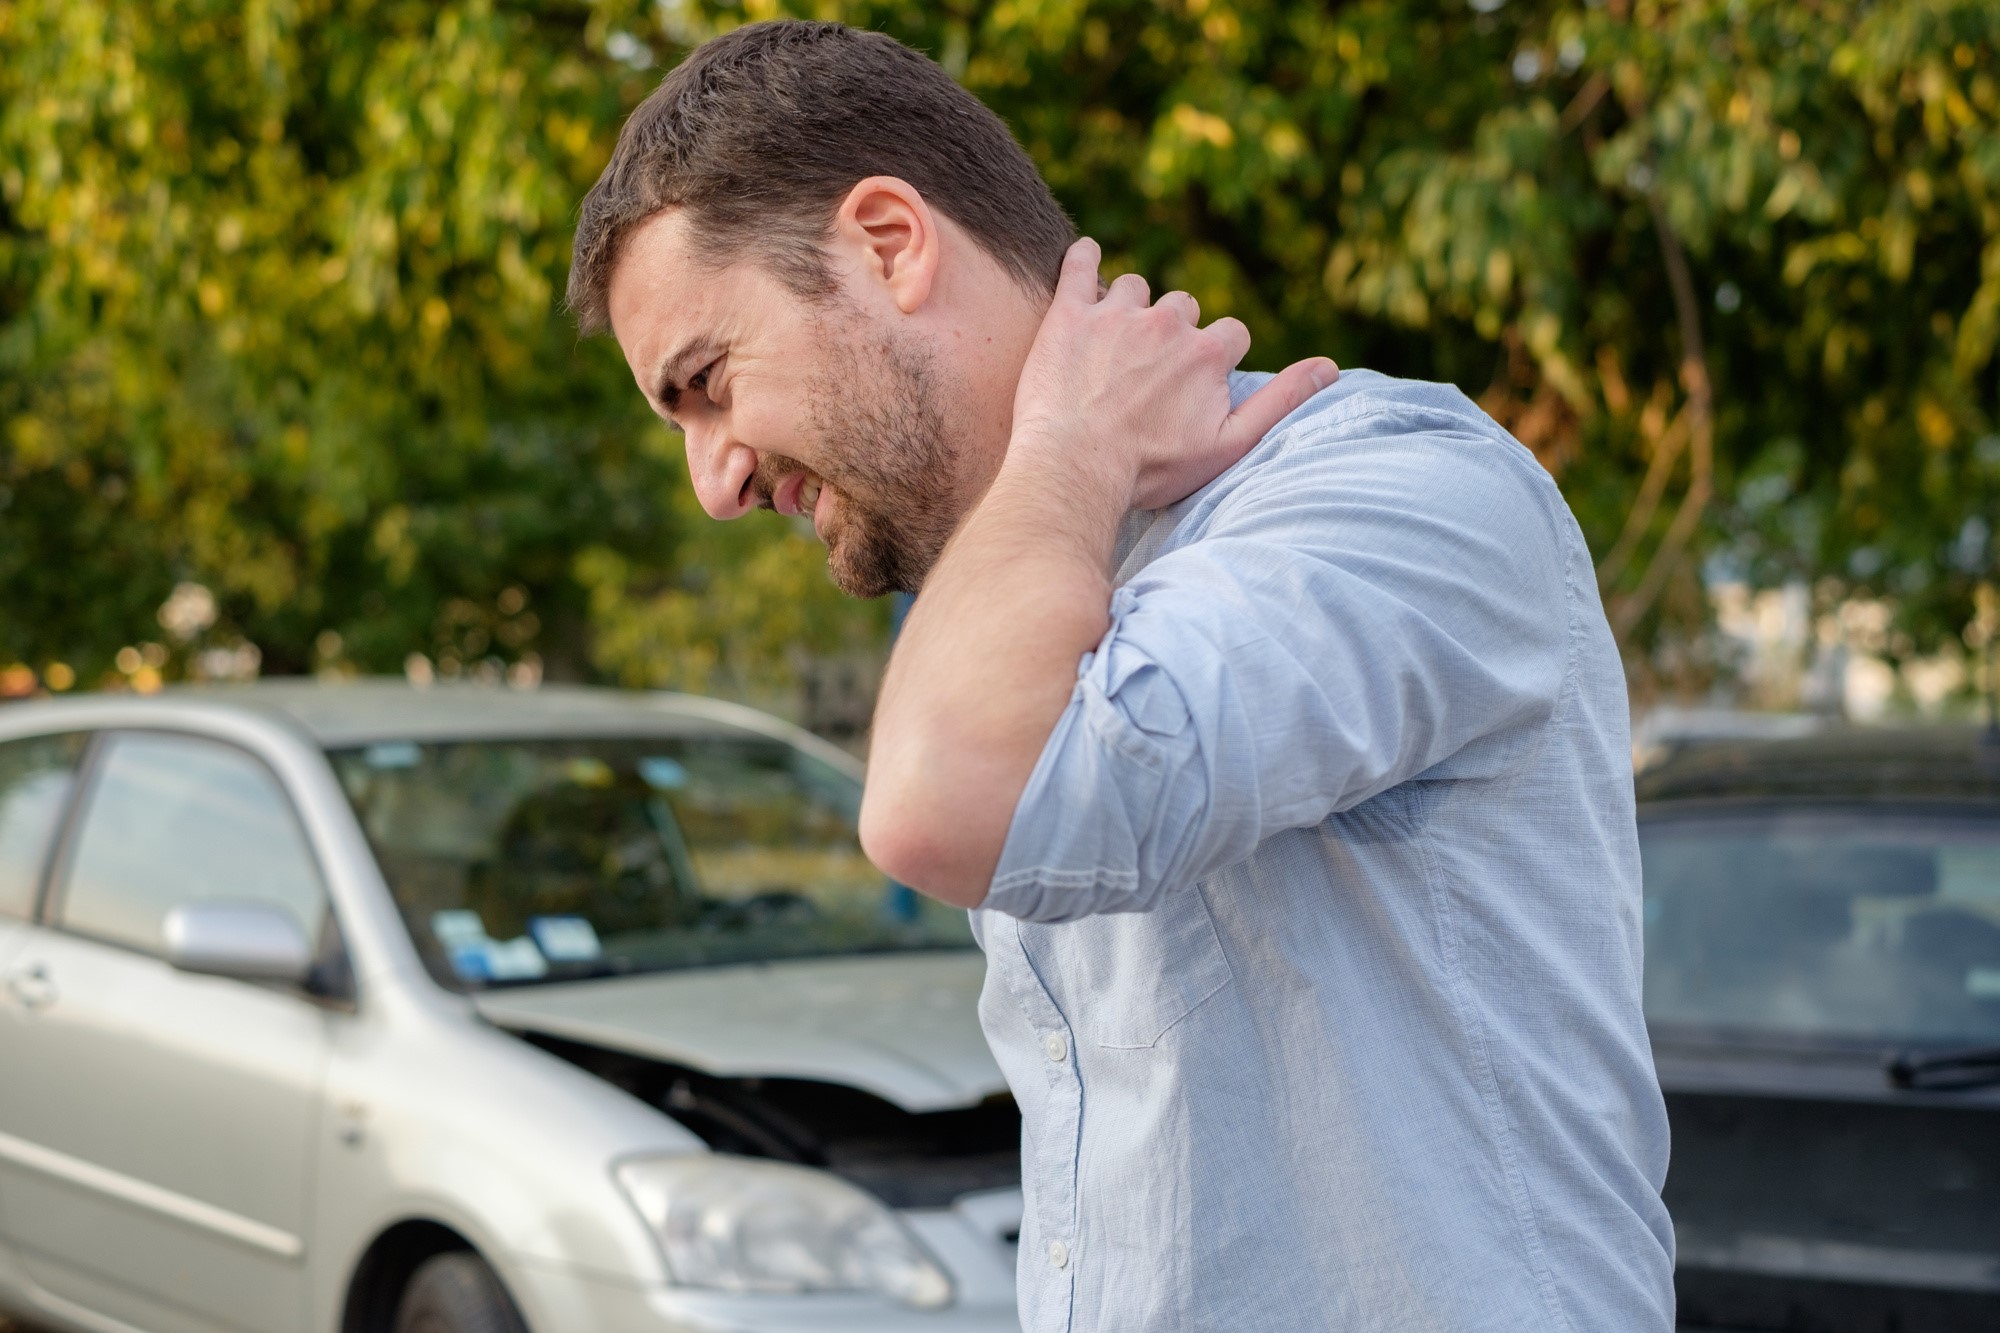 Where to Find Car Injury Doctors After a Car Accident